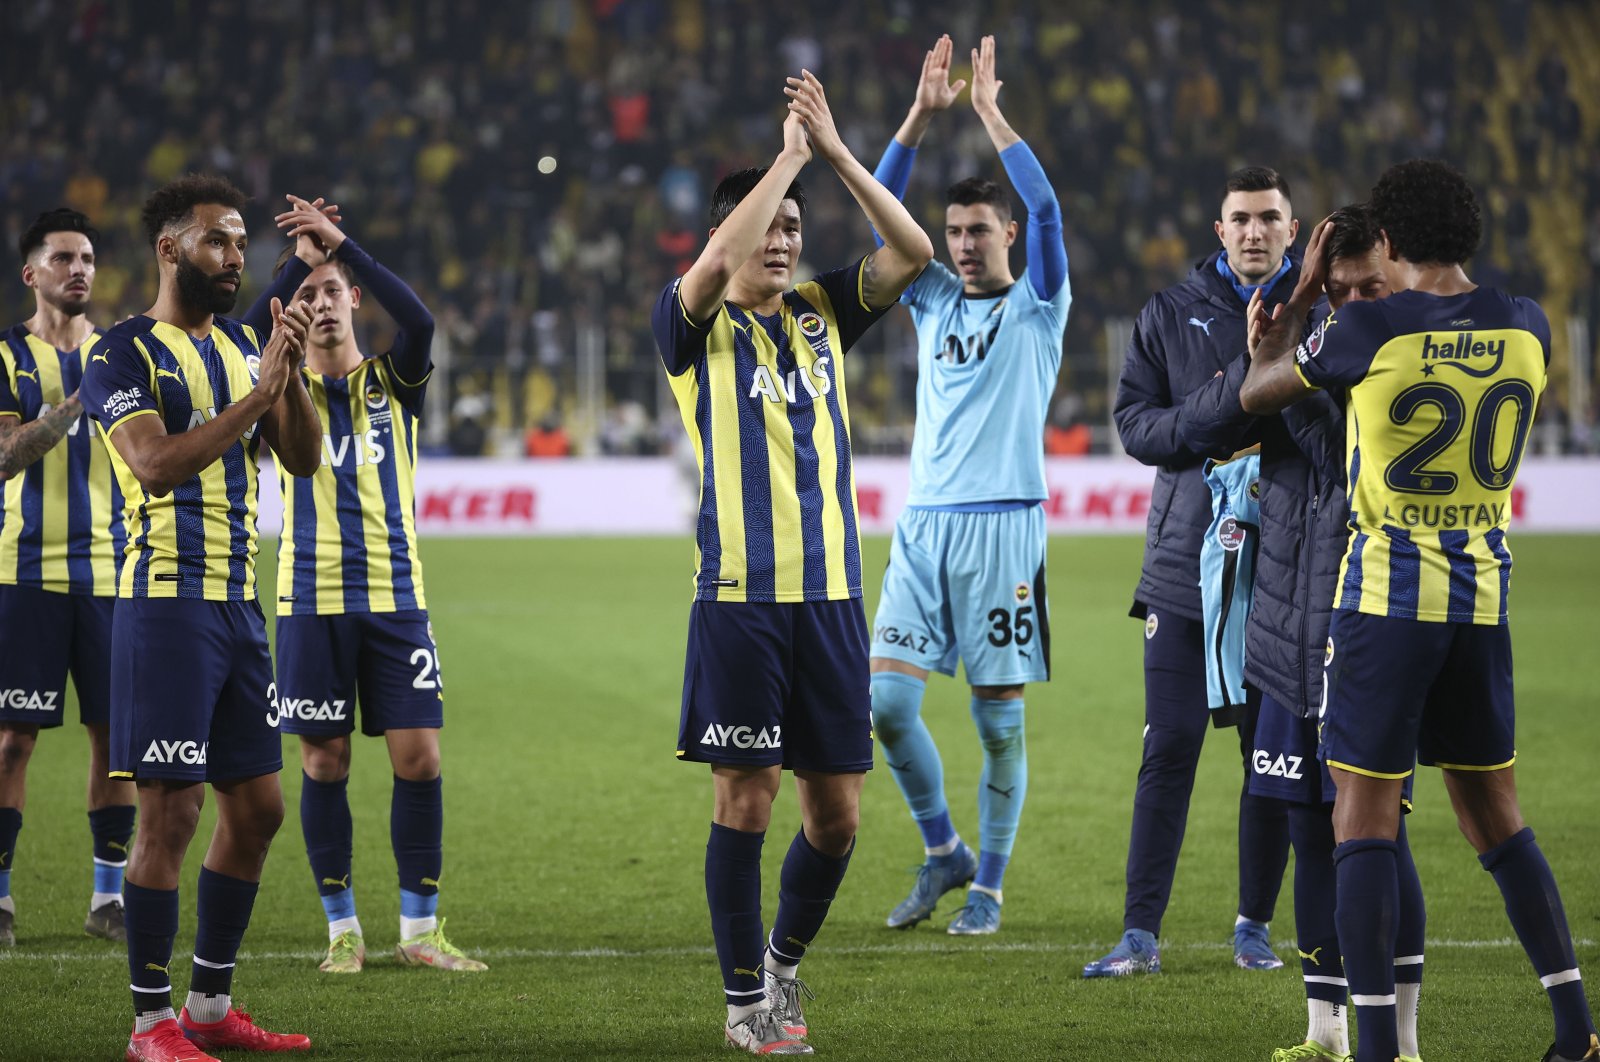 Fenerbahçe players celebrate after their win, Dec. 5, 2021. (AA Photo)